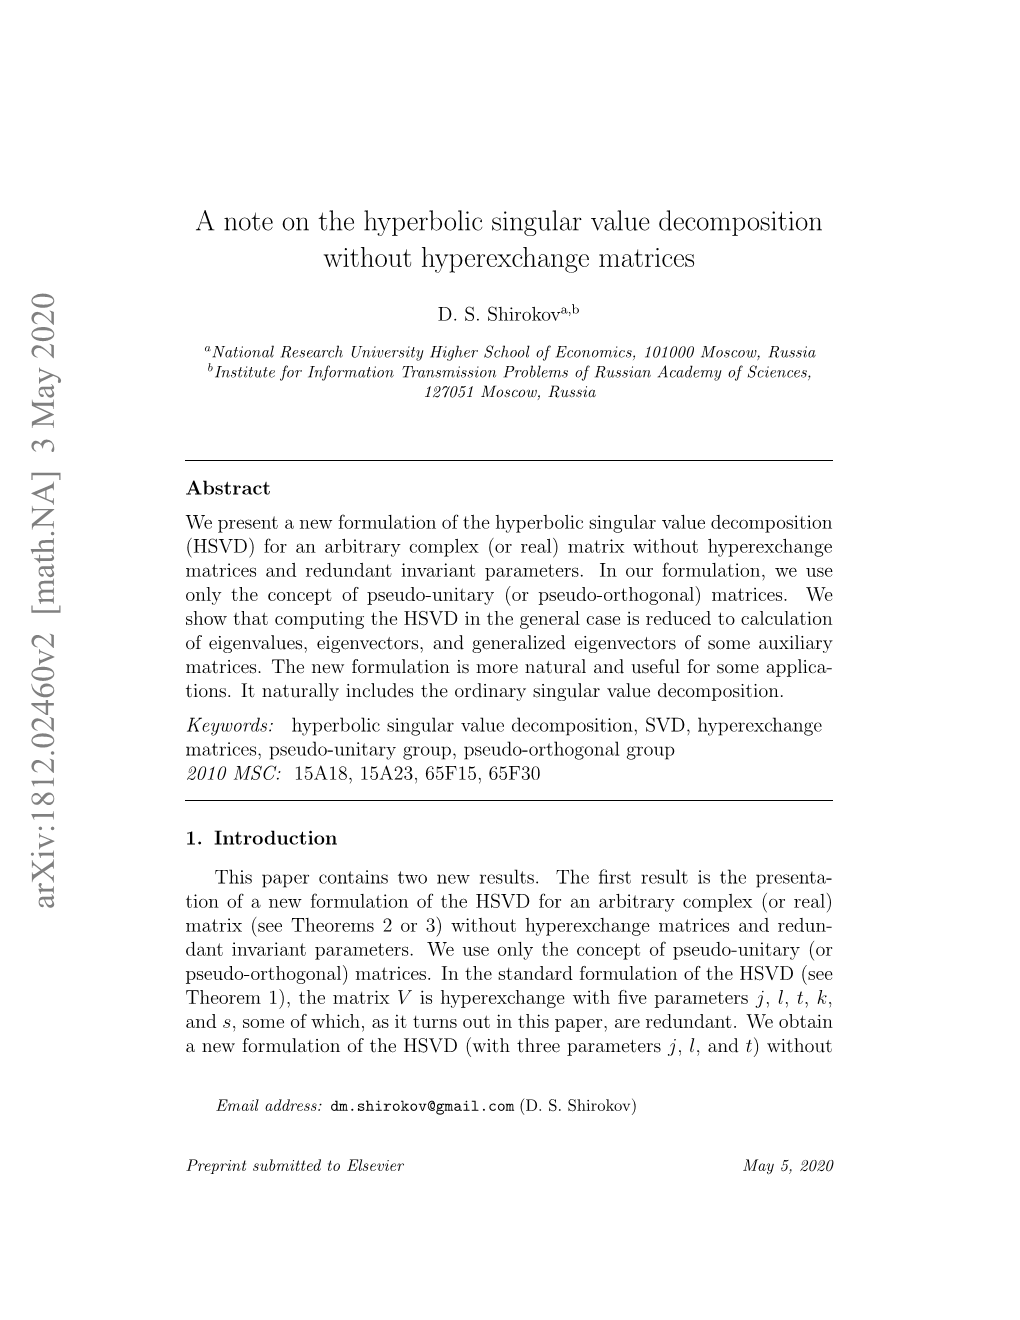 A Note on the Hyperbolic Singular Value Decomposition Without Hyperexchange Matrices